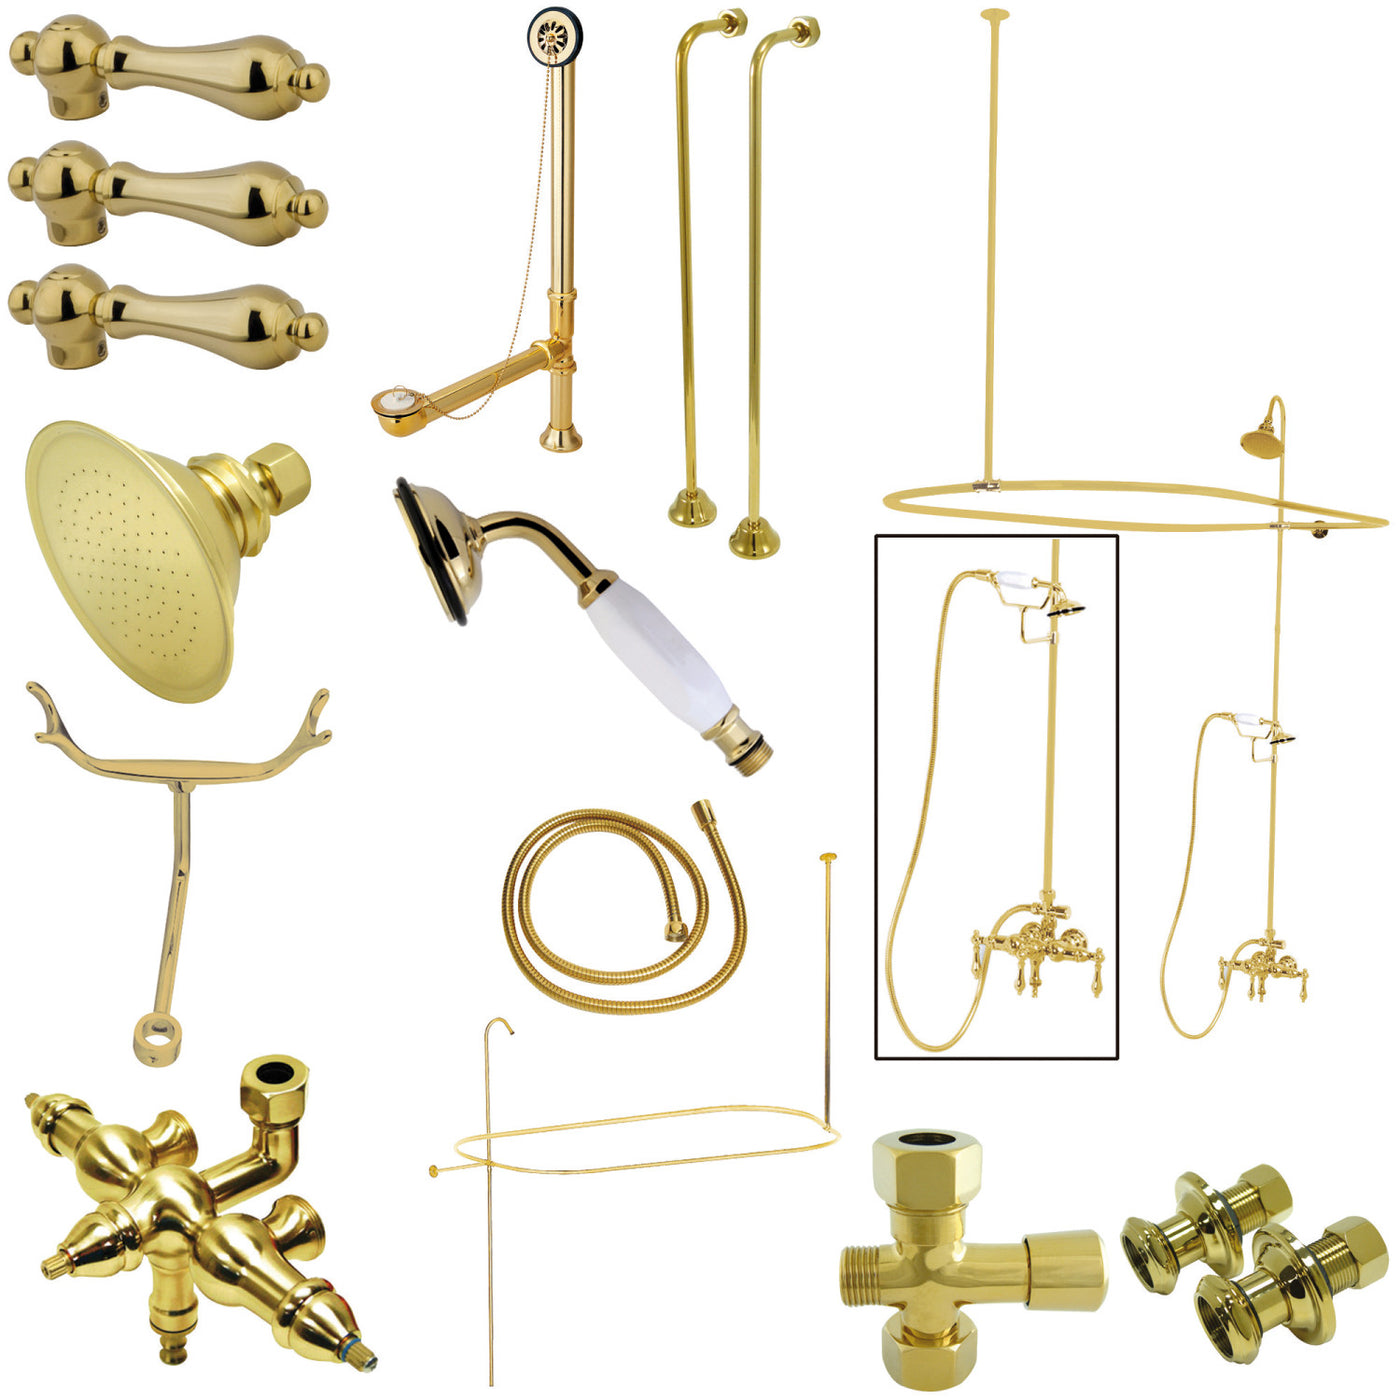 Elements of Design EDK3142AL Down Spout Clawfoot Tub Faucet Package, Polished Brass